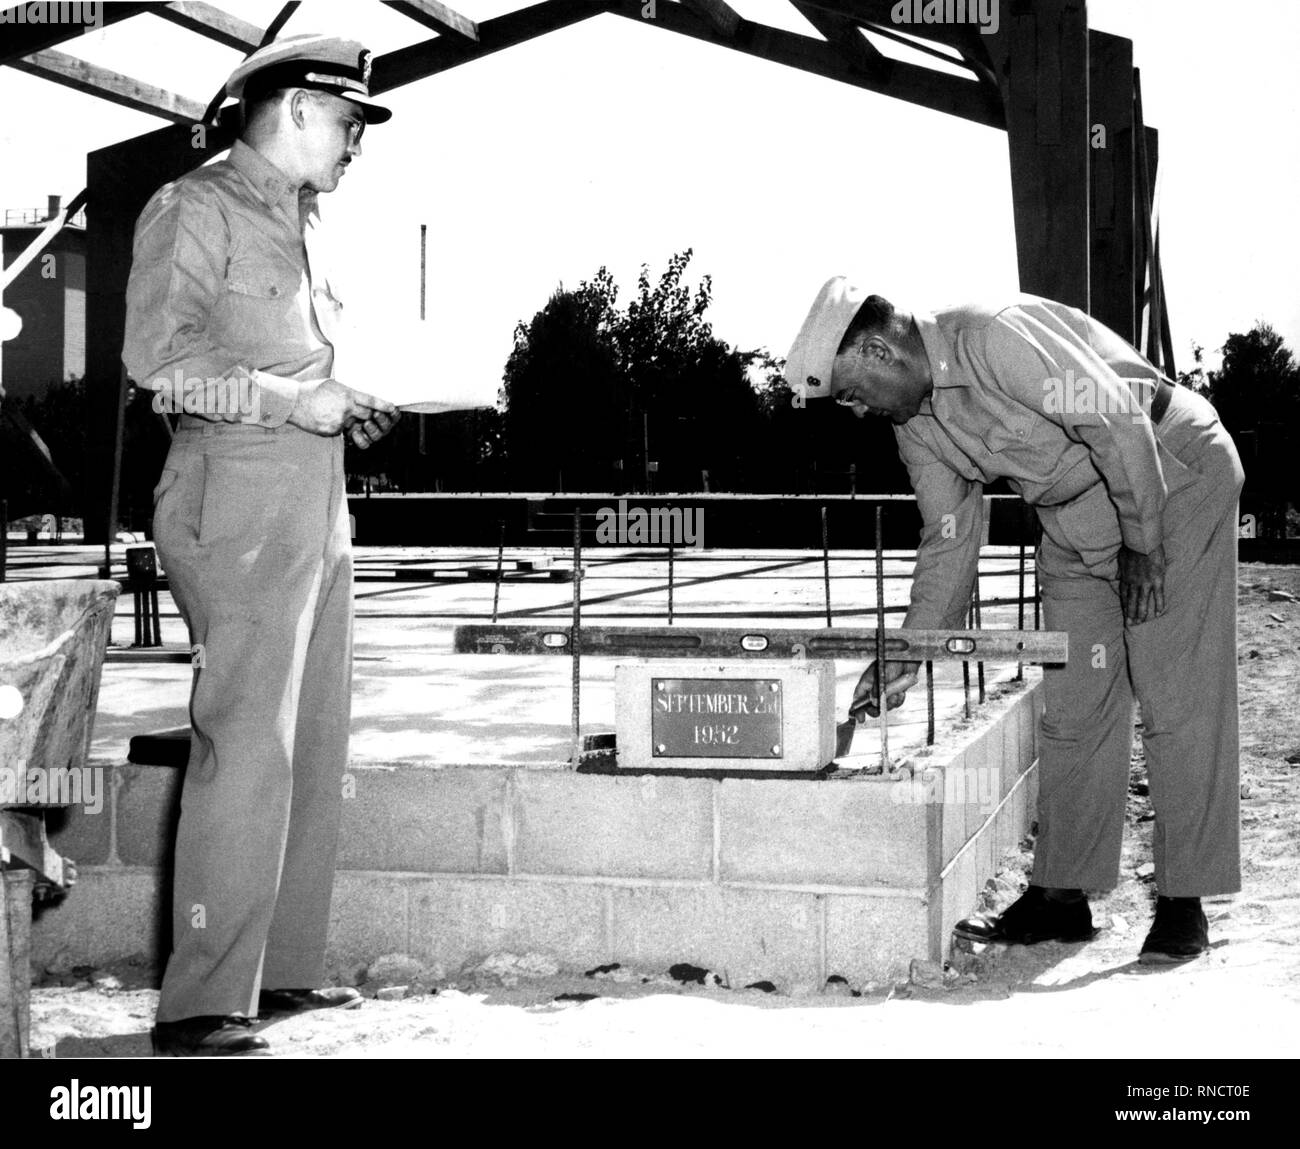 Cornerstone laying ceremony of the new Depot Chapel at the Barstow Annex of the Marine Corps Depot of Supplies, San Francisco, on 2 September 1952.  The service was conducted by US Navy Chaplain Warren L. Bost (Left), Protestant Chaplain at the Barstow Annex, with US Marine Colonel Arthur J. Davis, Commanding Officer of the Barstow Annex setting the cornerstone in place. Stock Photo